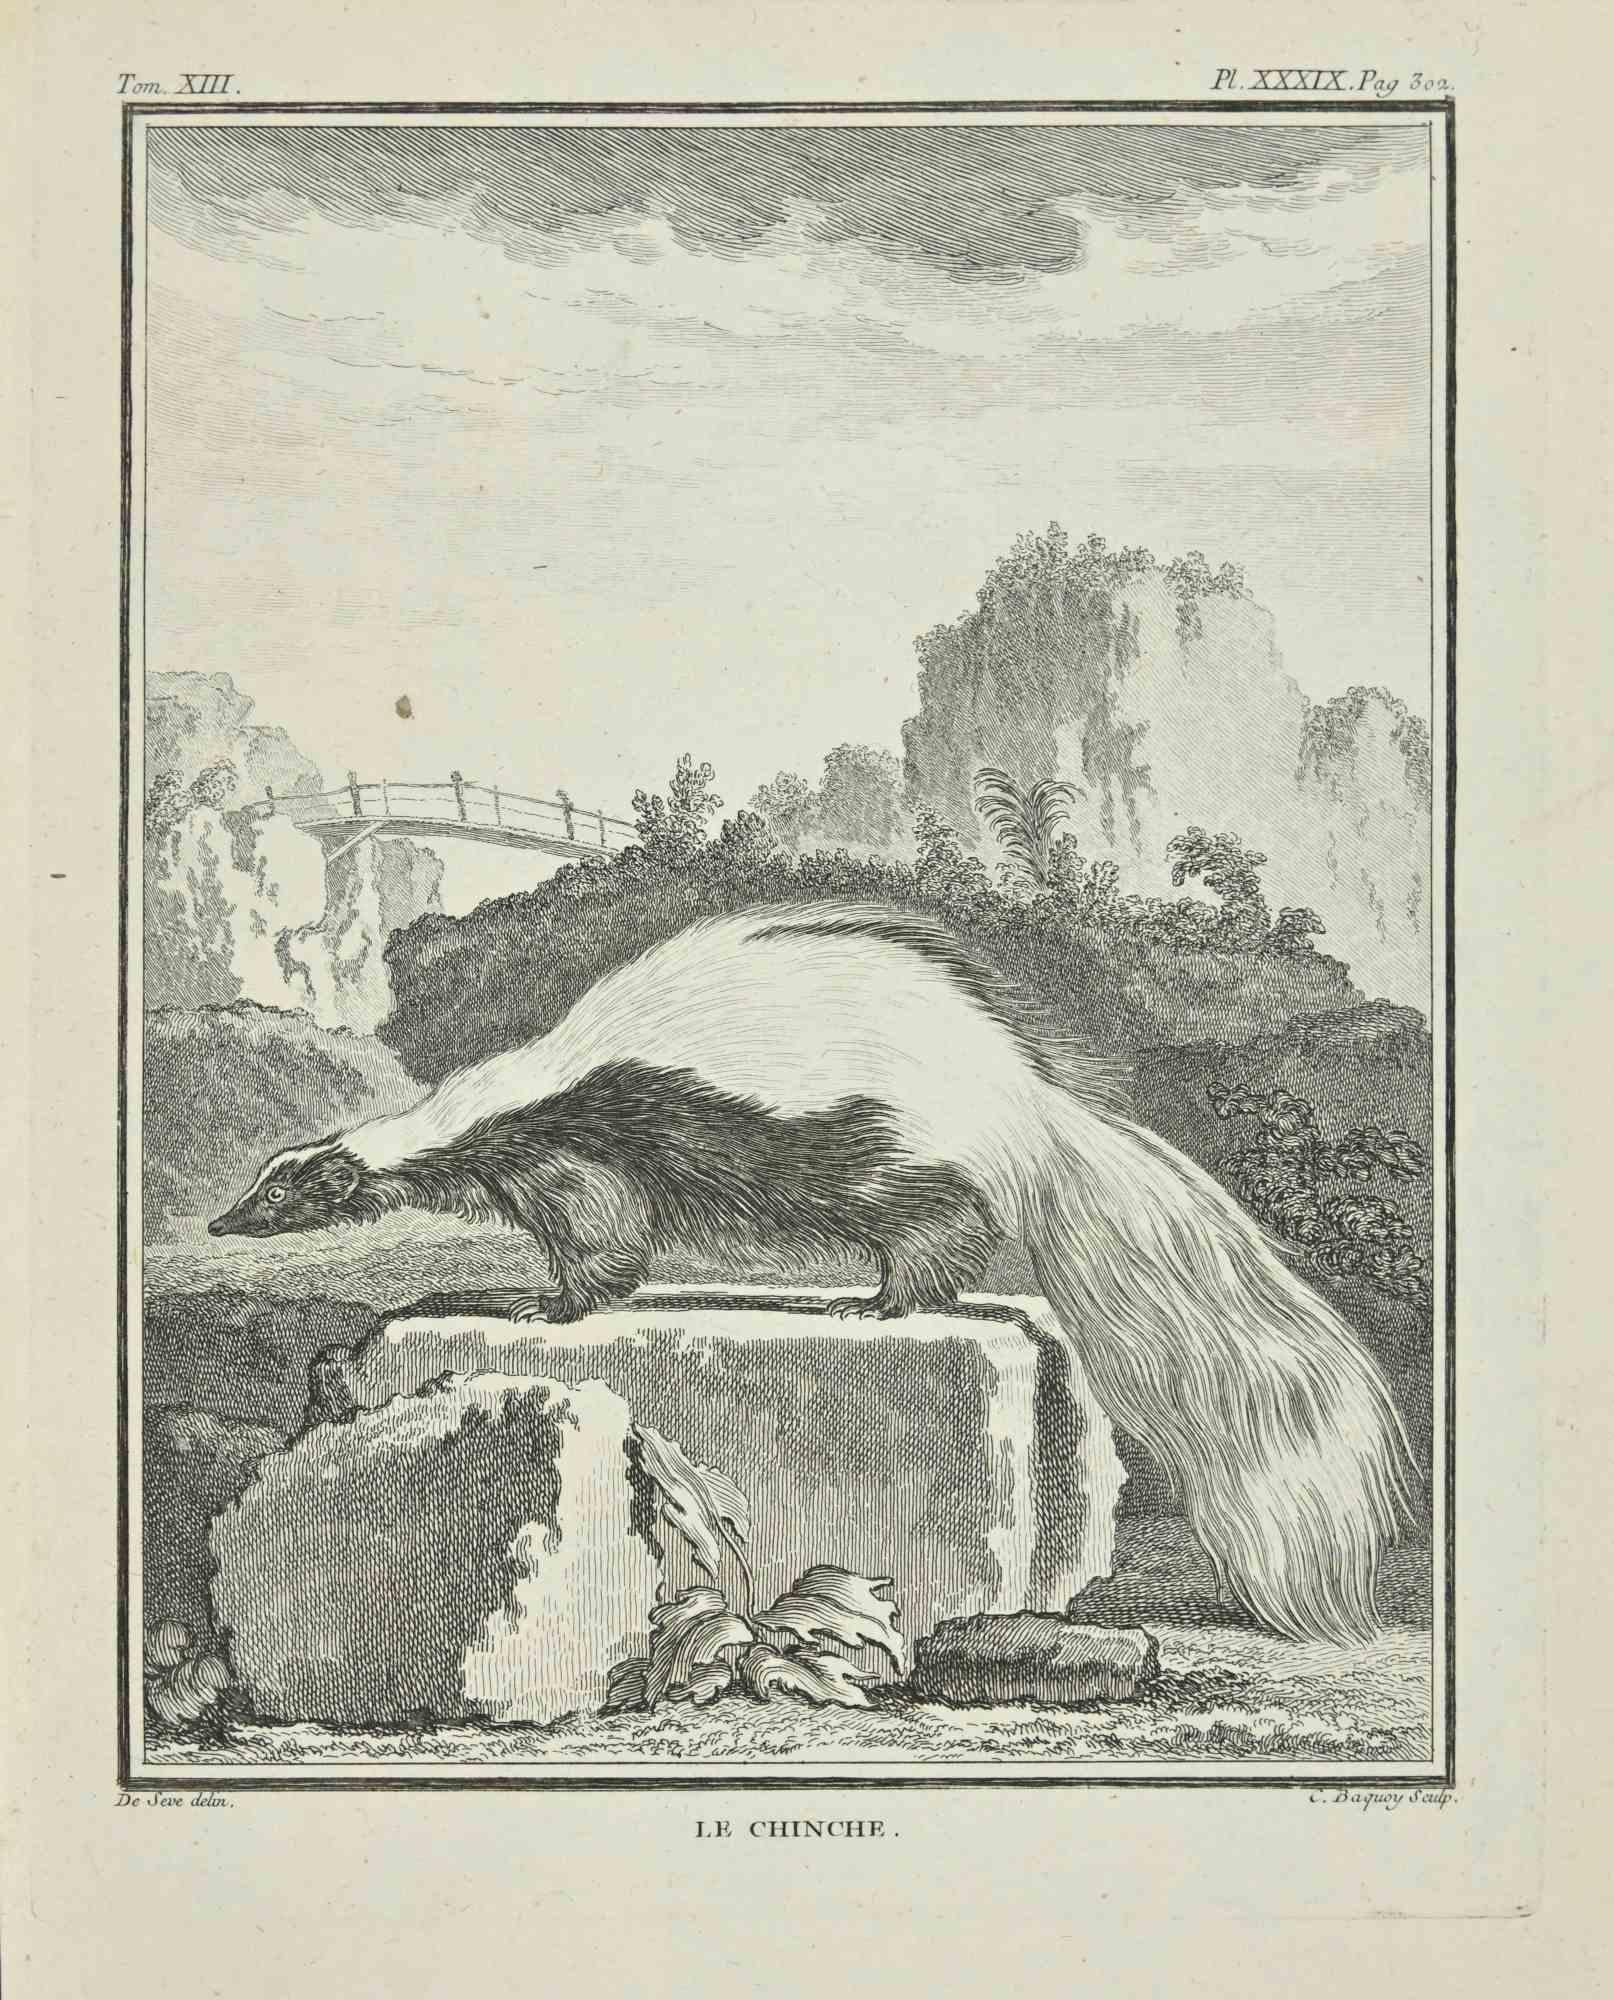 Le Chincher - Etching by Jean Charles Baquoy - 1771